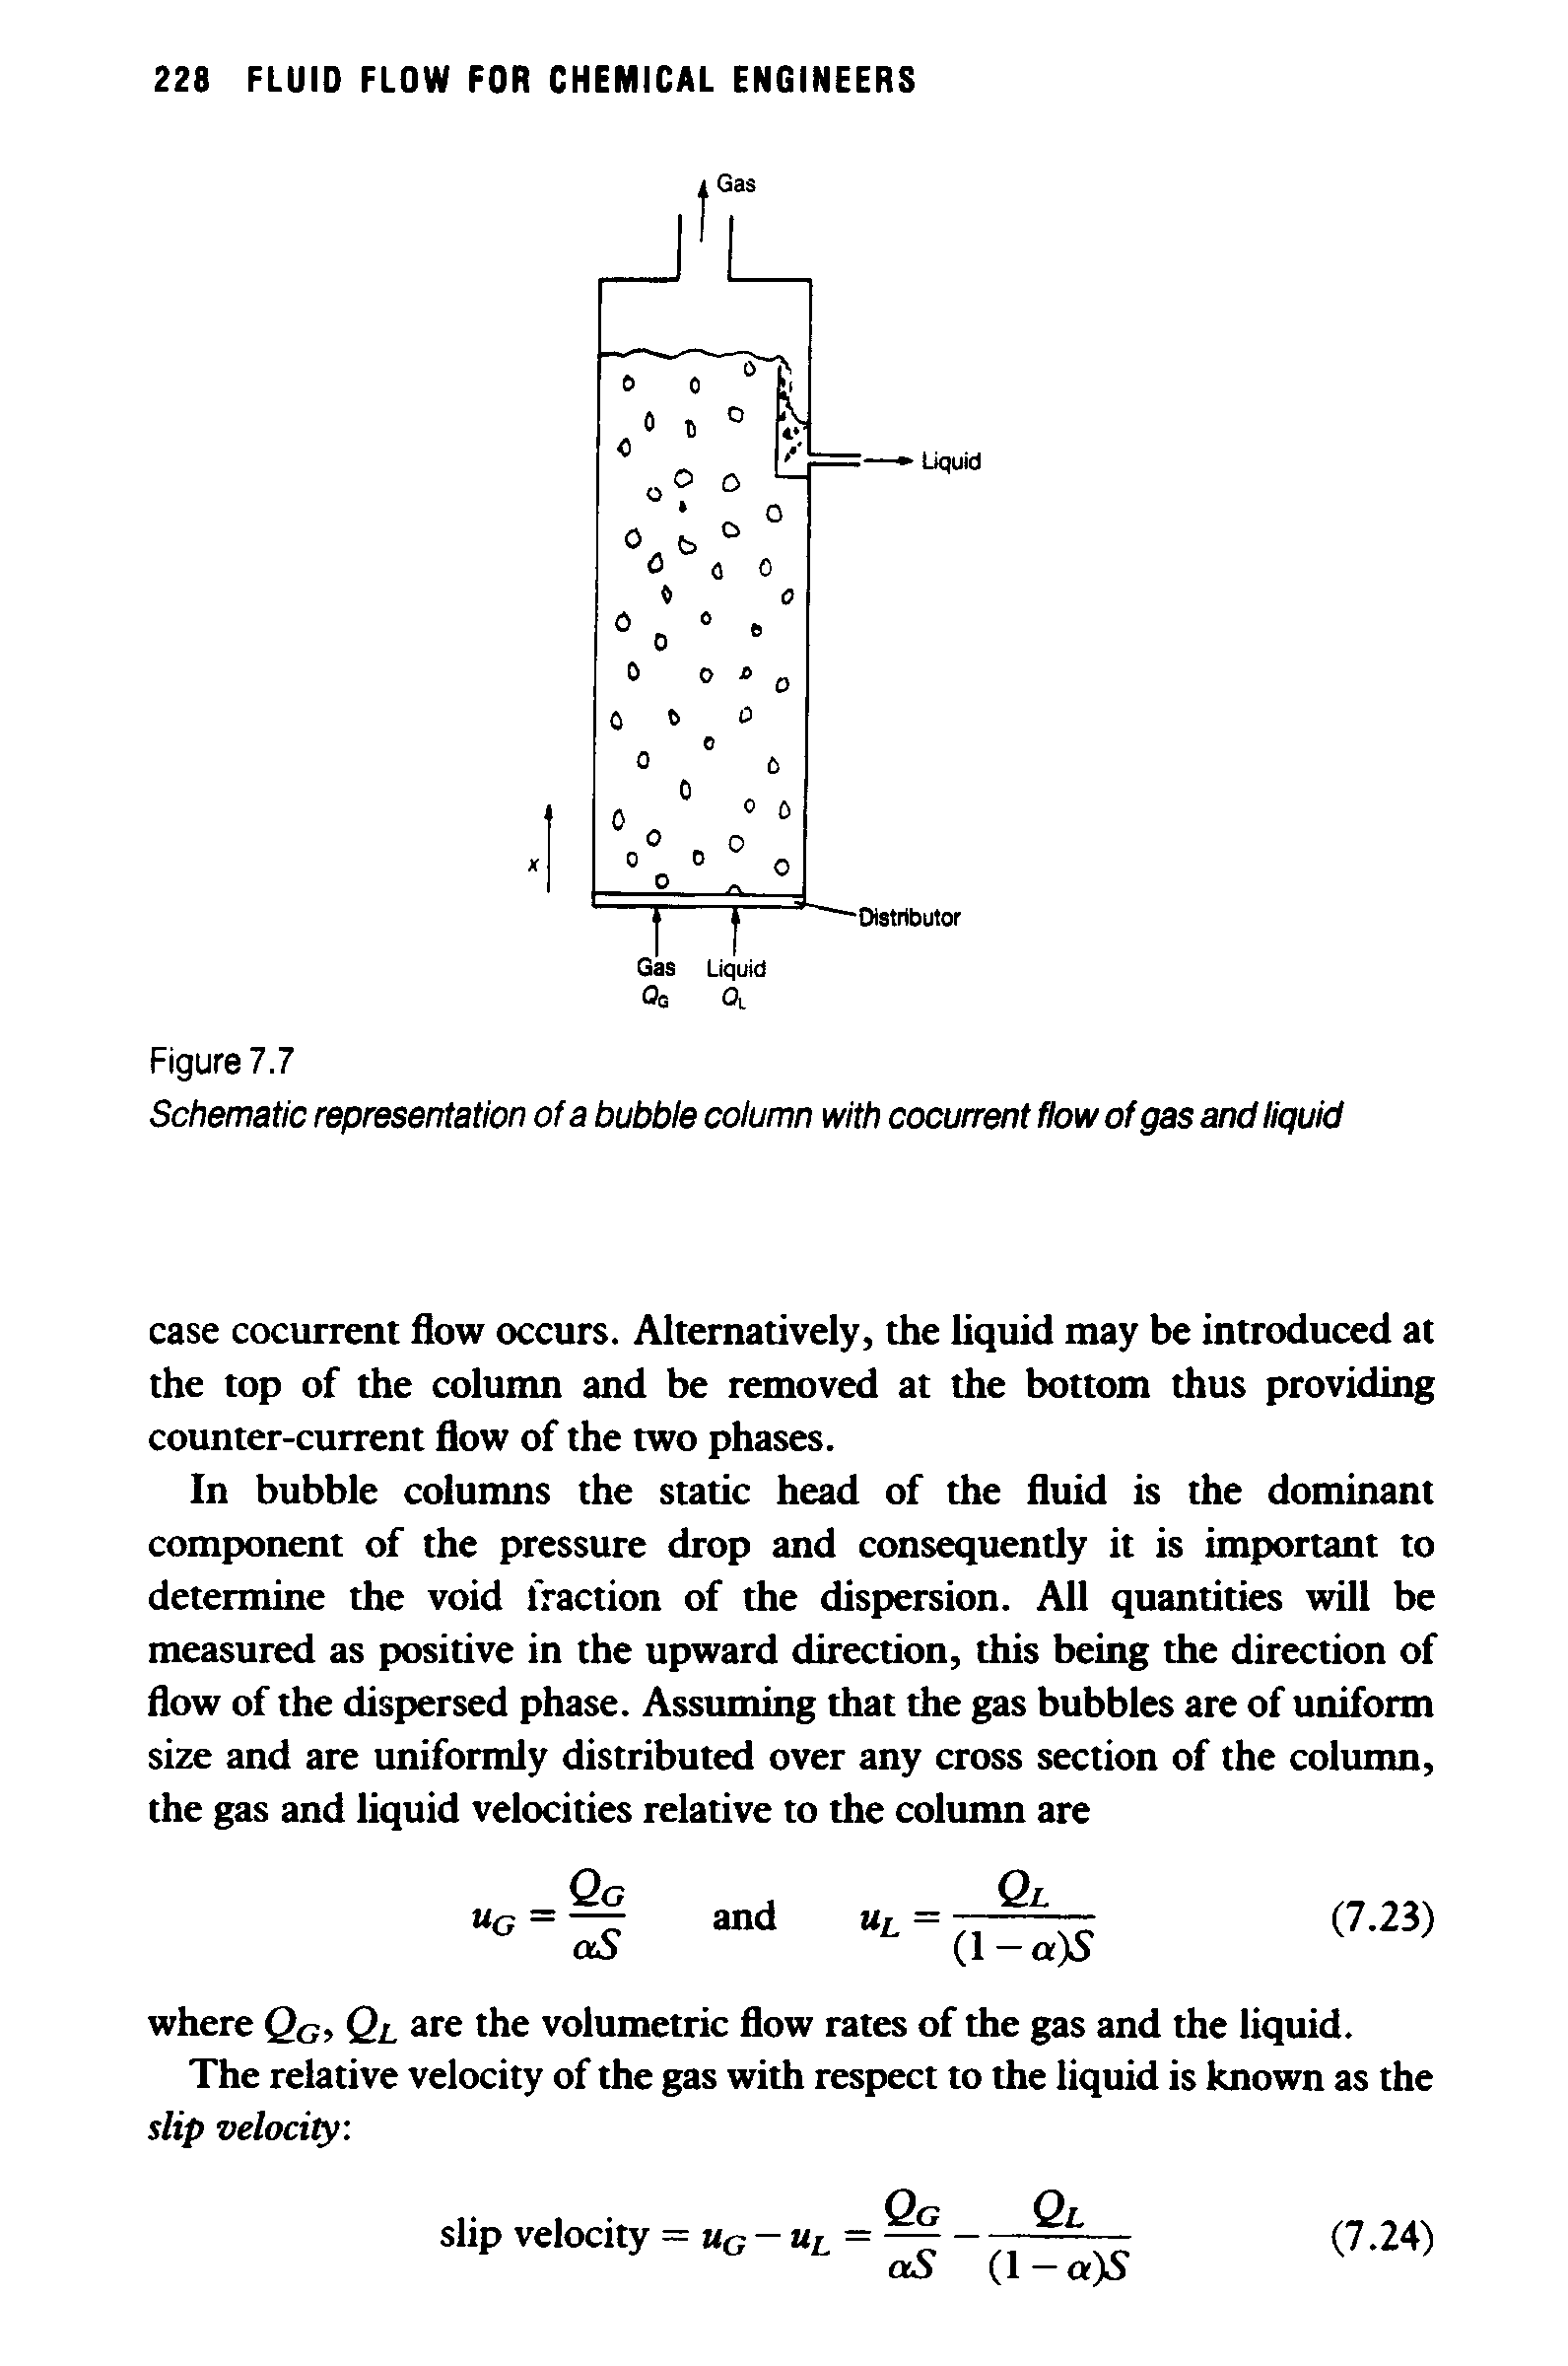 Schematic representation of a bubble column with cocurrent flow of gas and liquid...